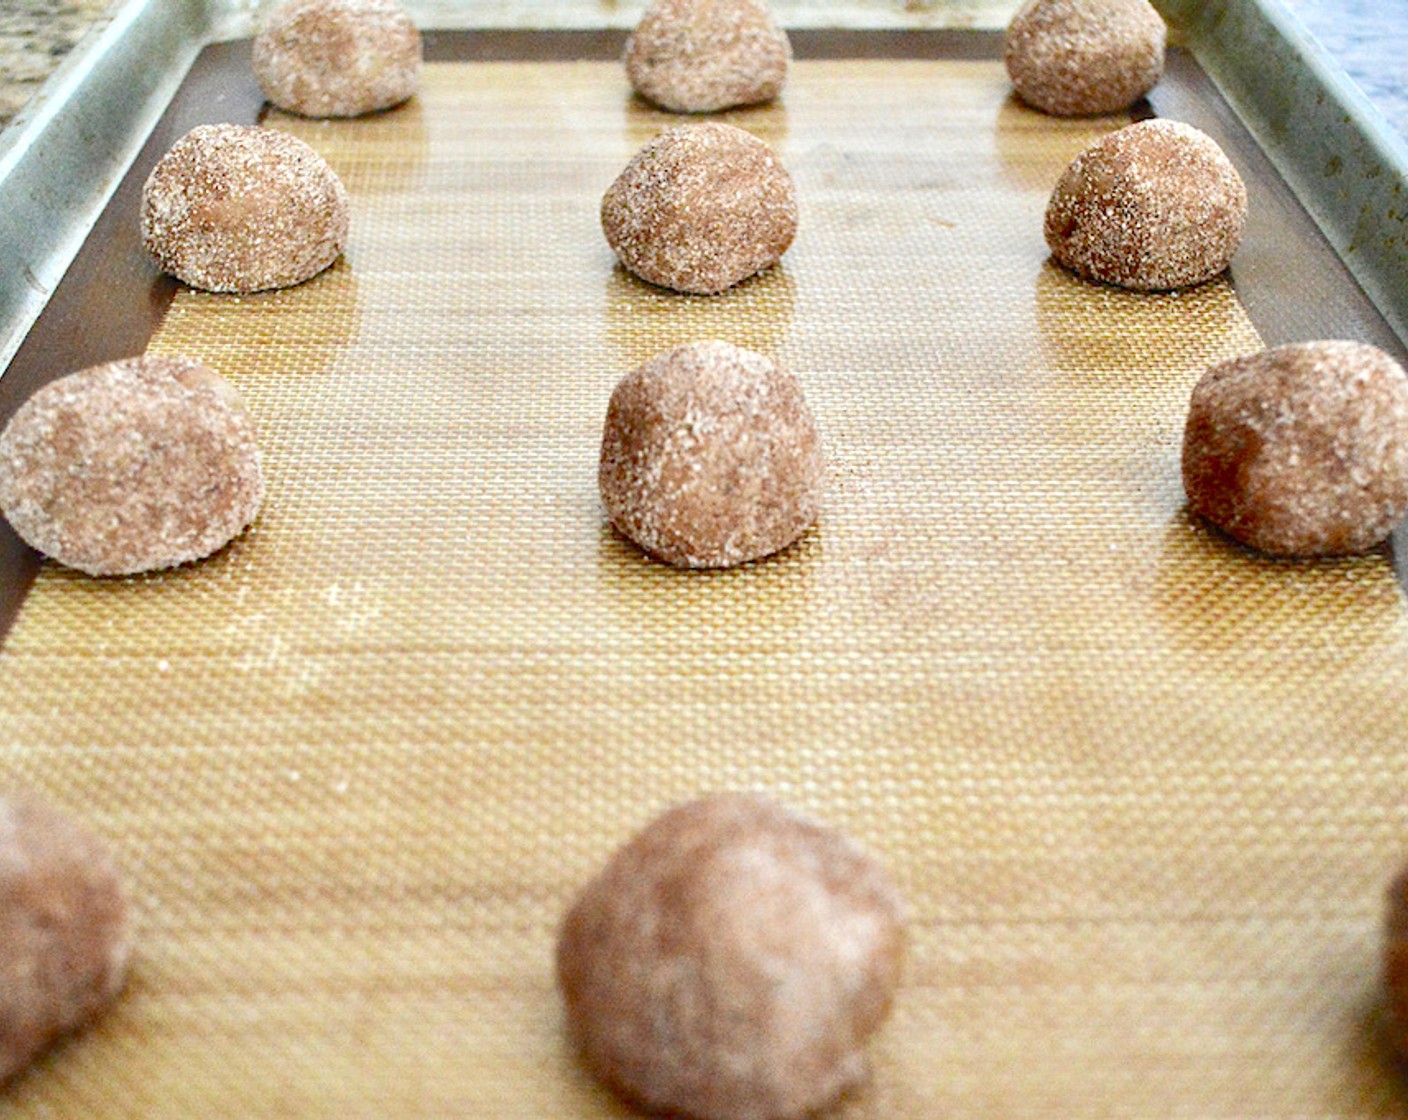 step 8 Use a cookie scoop to scoop a perfect mound of dough into your hand. Smooth it into a ball, then run it through the bowl of cinnamon and sugar to coat it. Repeat until you have a dozen coated balls of dough evenly spaced on each sheet tray.